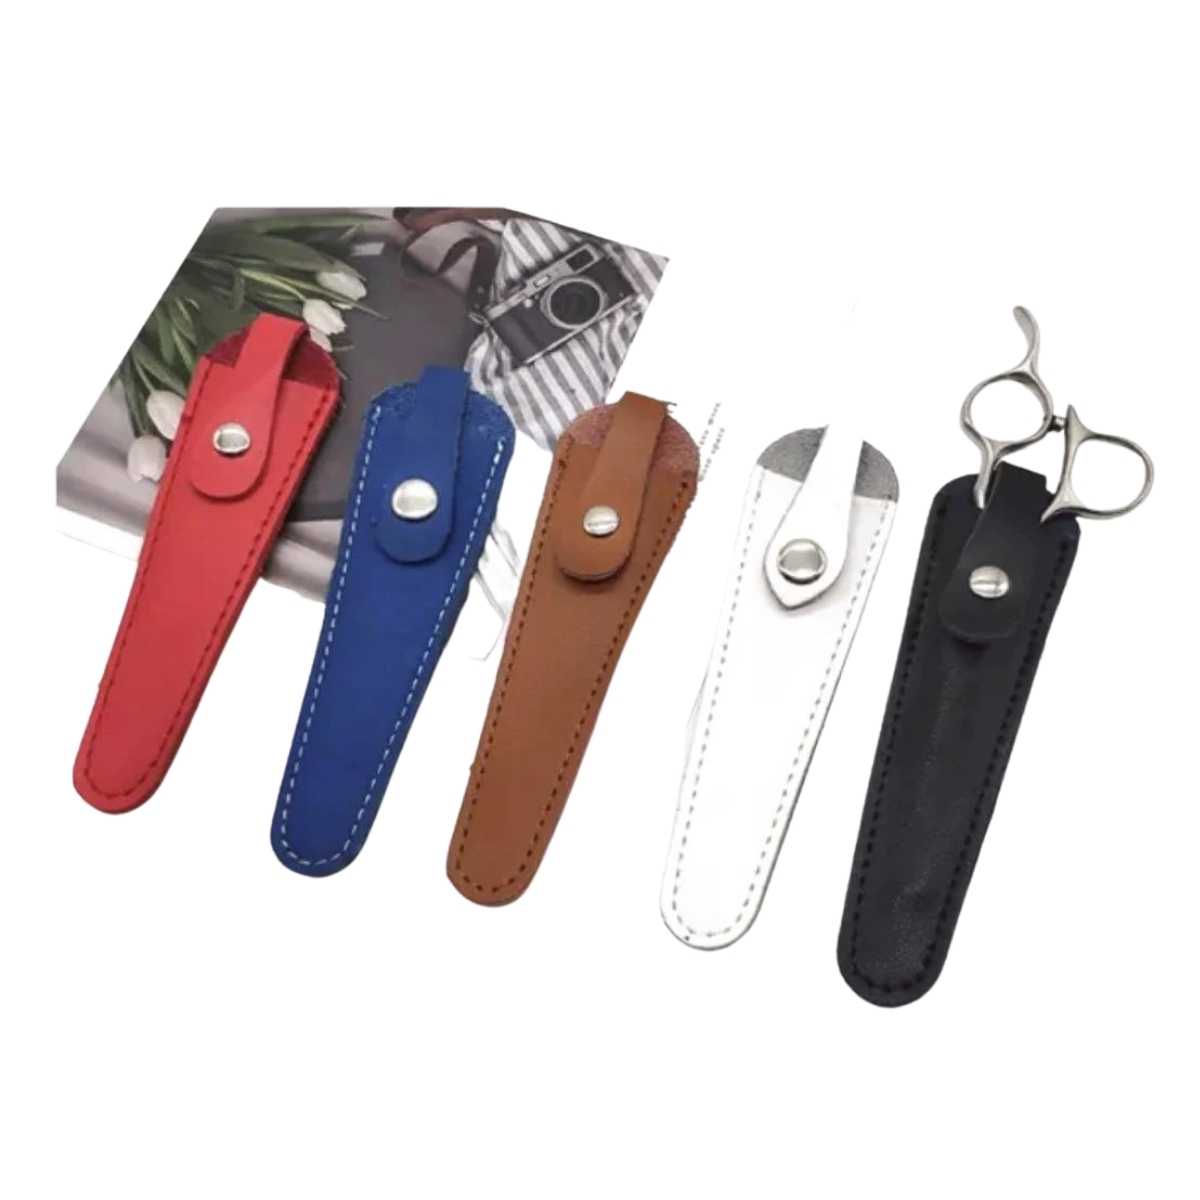 MERRYHAPY 6pcs Scissors Case Scissors Sheaths Scissors Sleeves Leather  Scissors Cover Eyebrow Trimming Scissors Collect Bags Shear Case Extra  Thick Pu